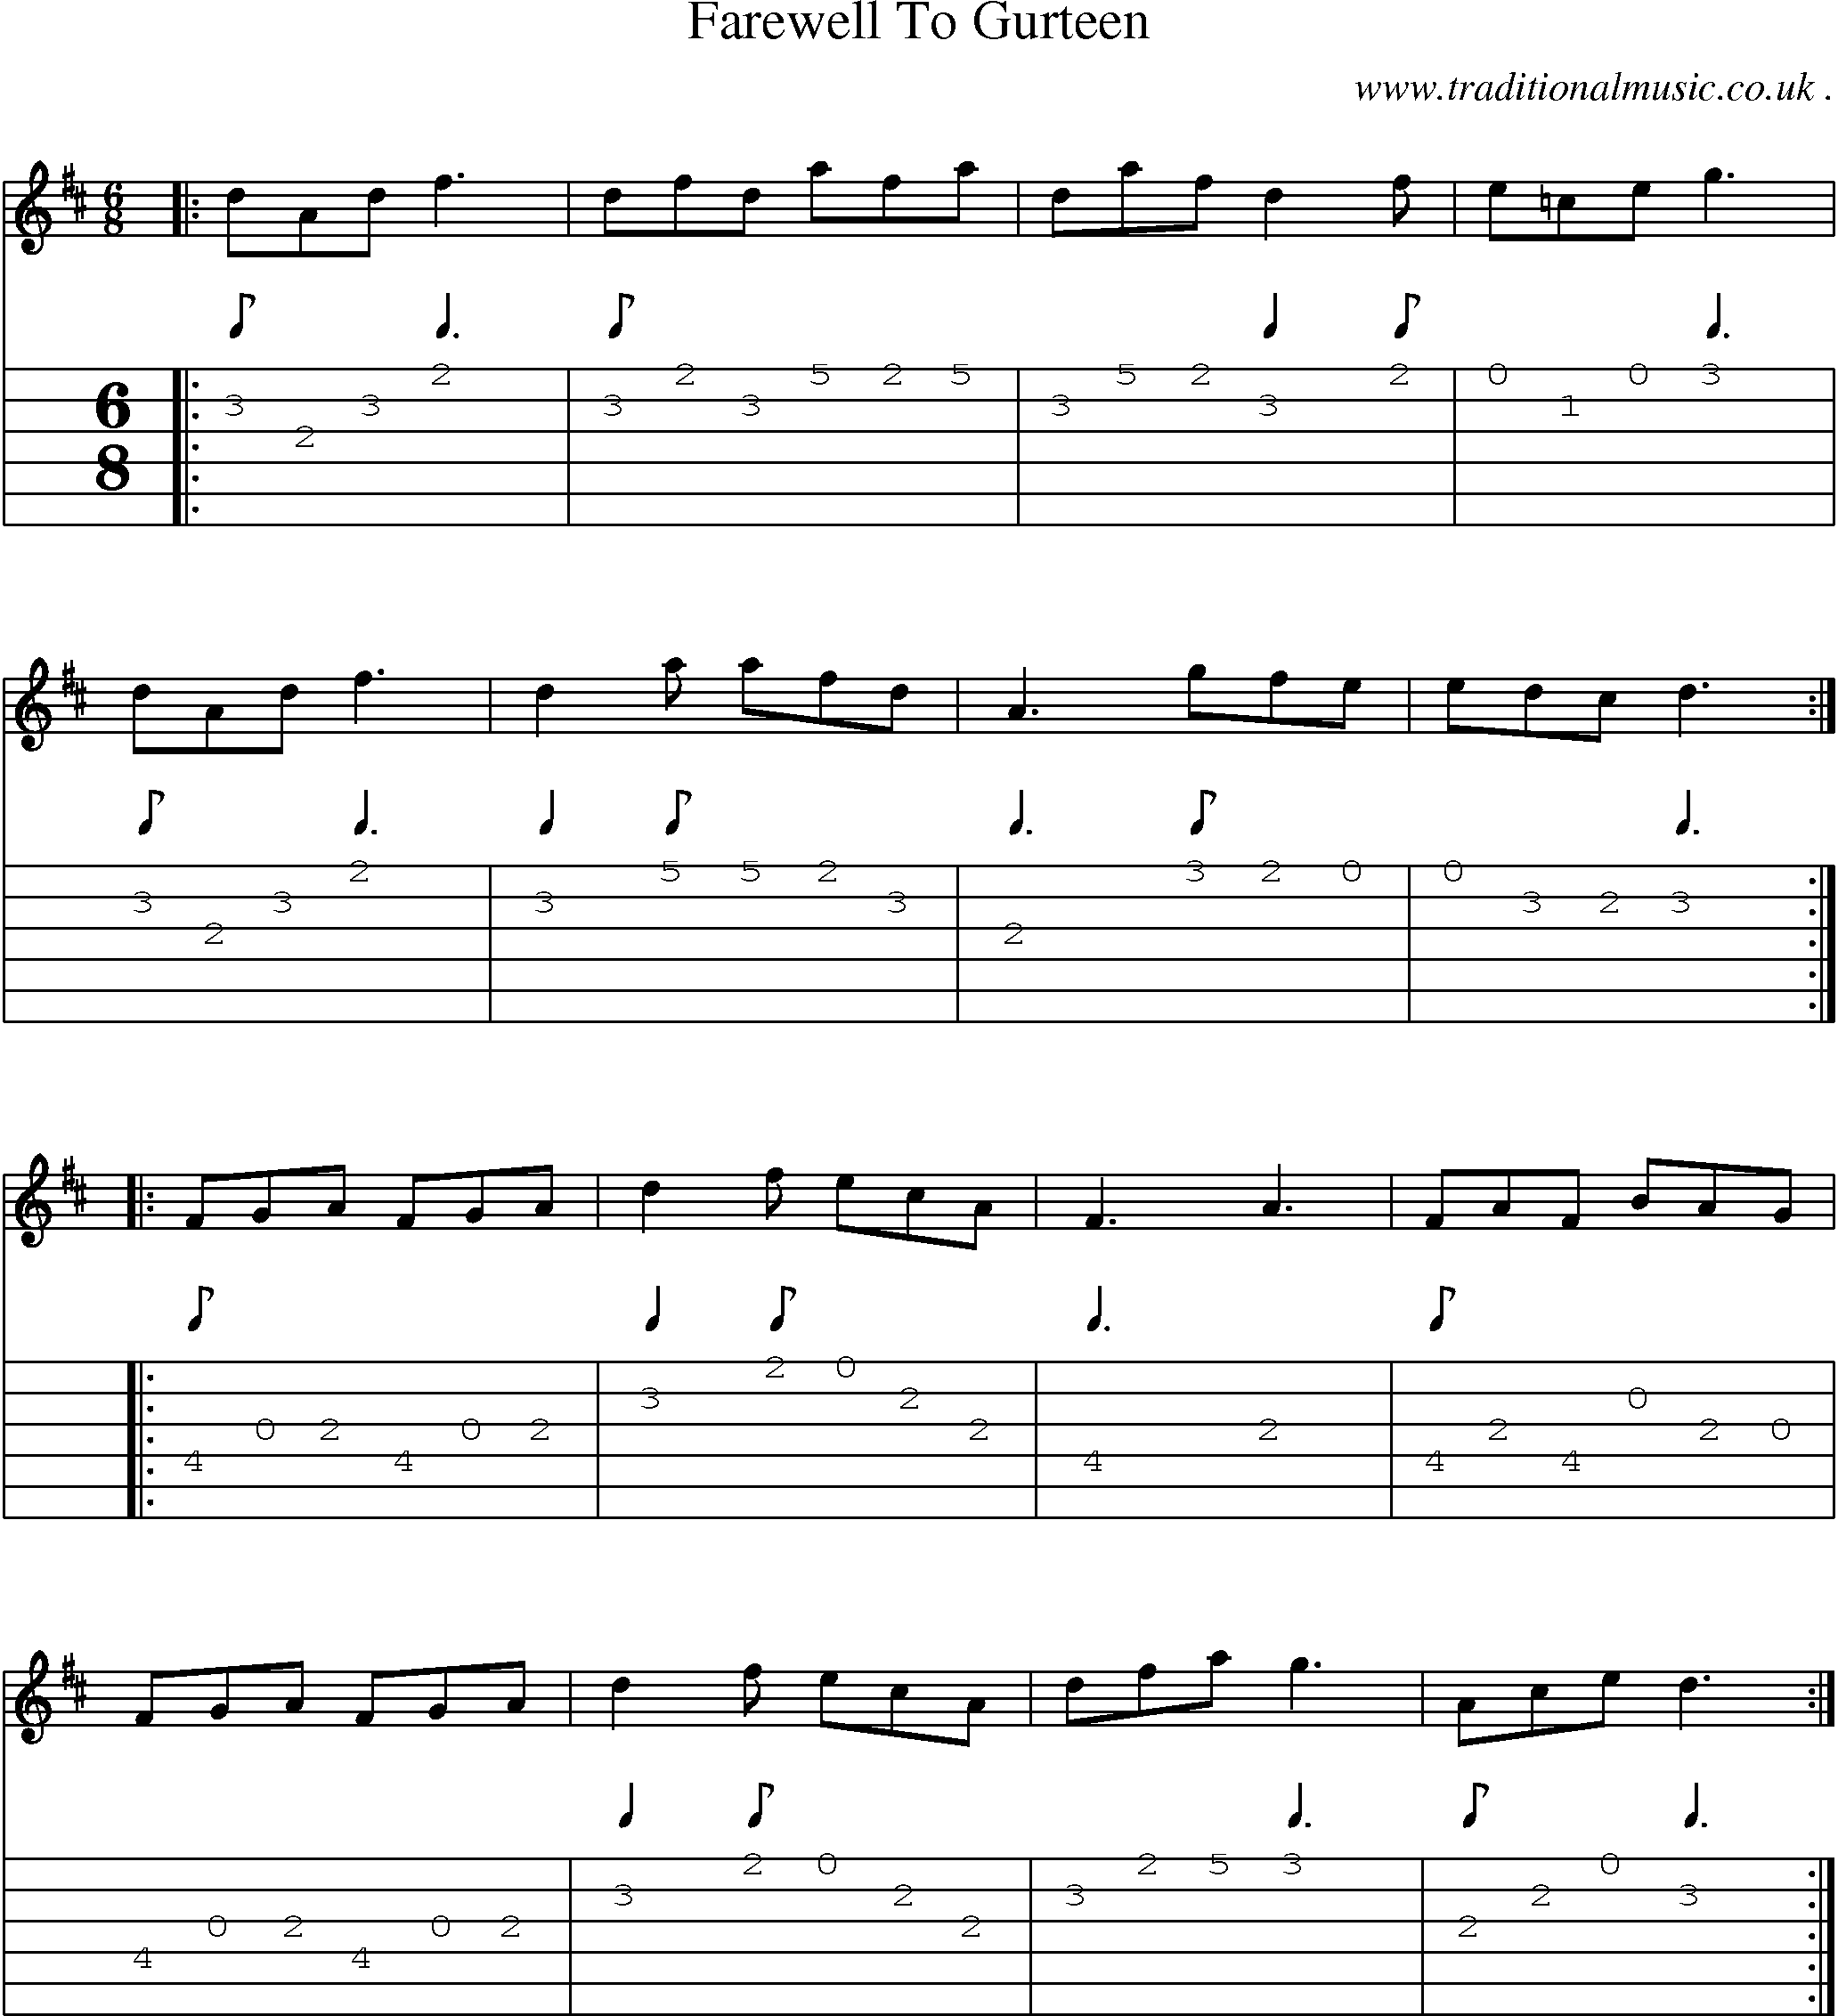 Sheet-Music and Guitar Tabs for Farewell To Gurteen